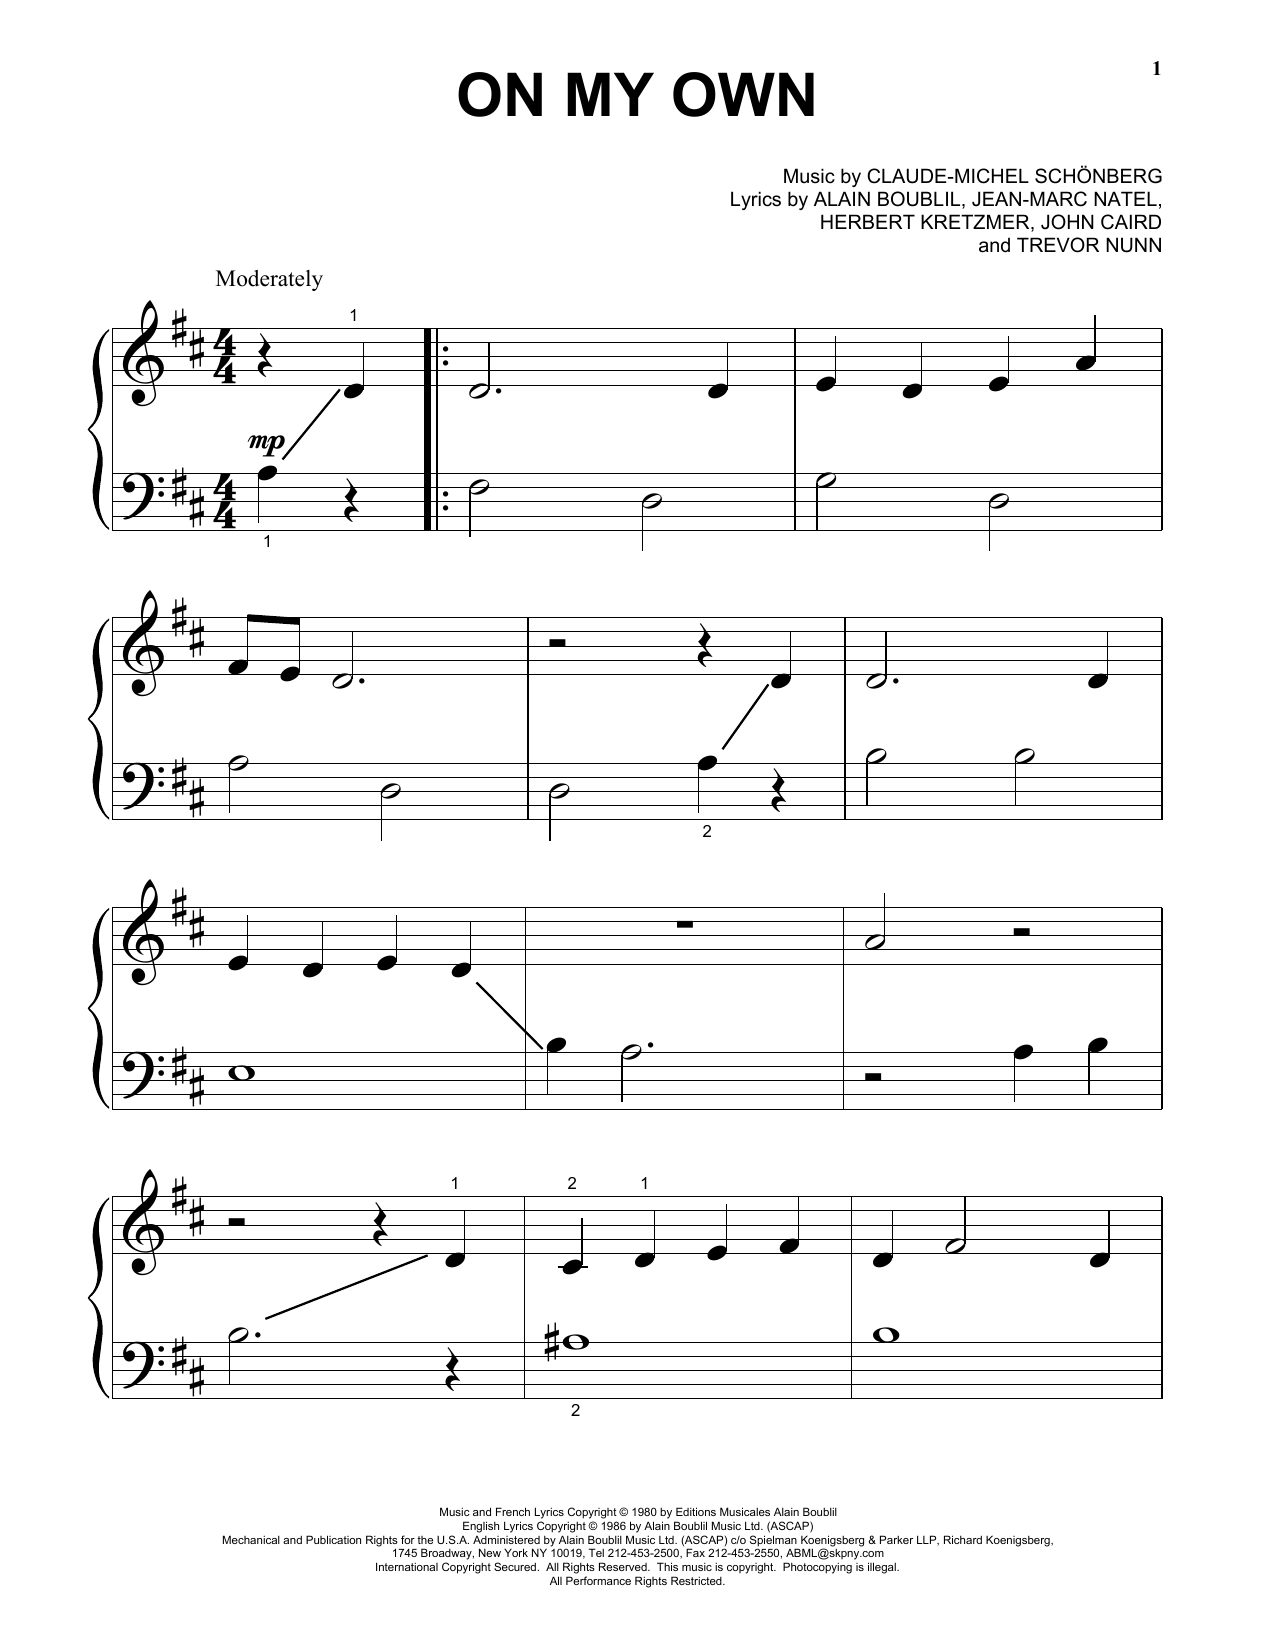 Download Claude-Michel Schonberg On My Own (from Les Miserables) Sheet Music